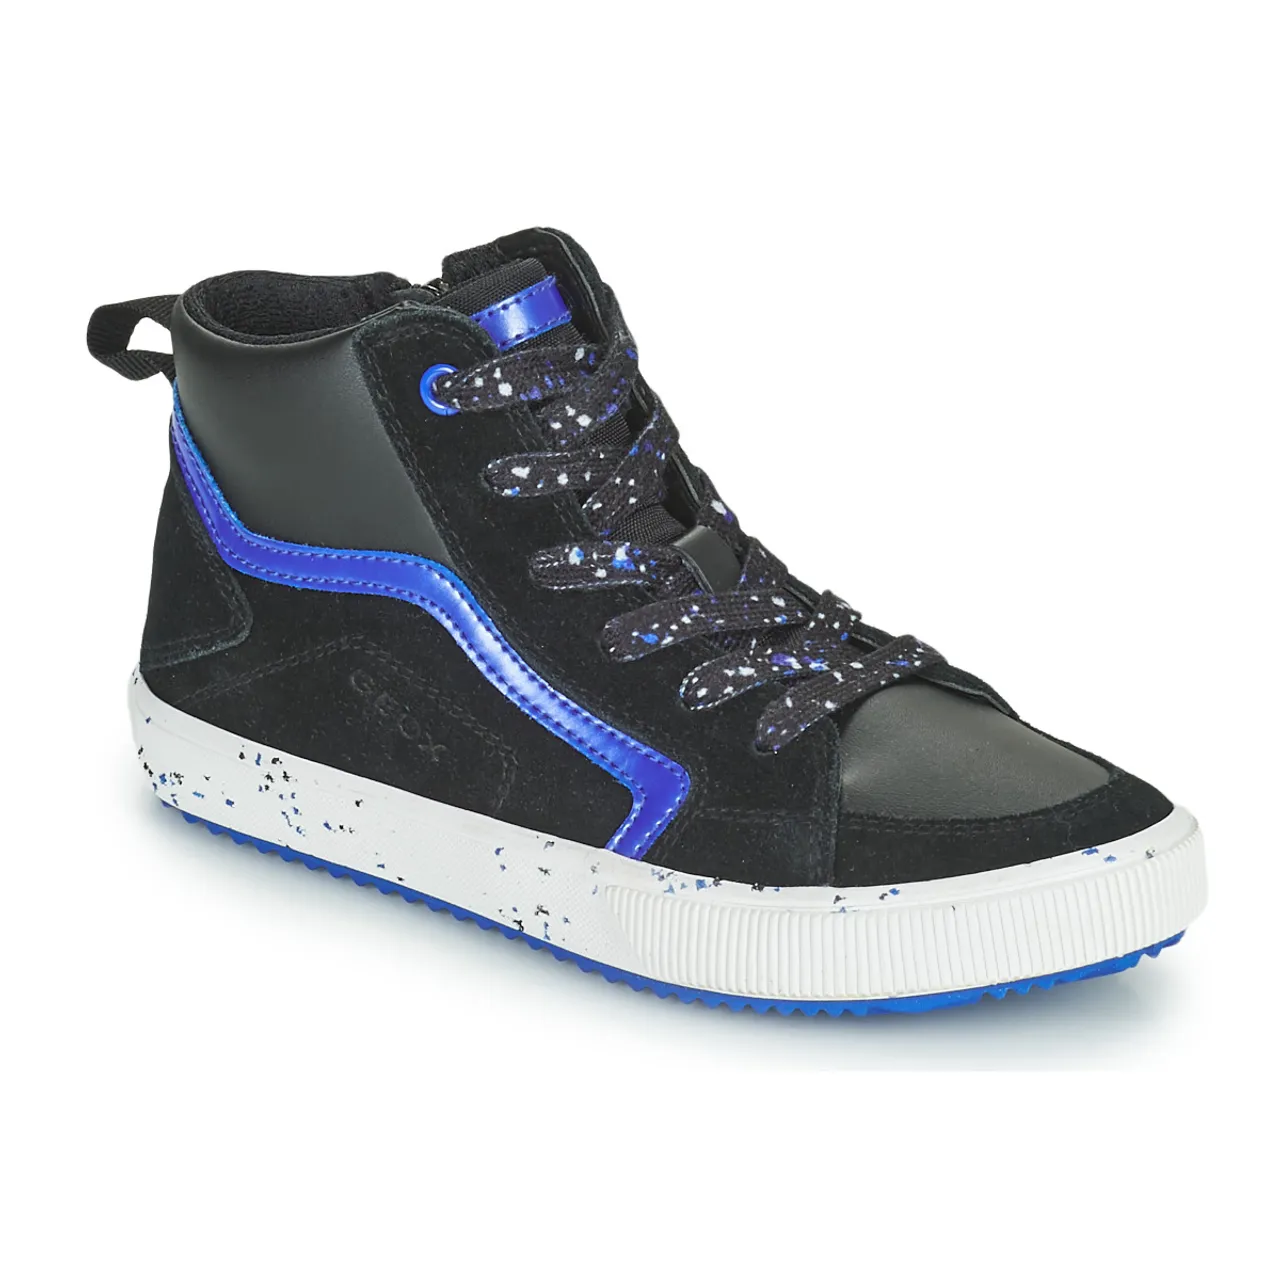 Geox  ALONISSO  boys's Children's Shoes (High-top Trainers) in Black